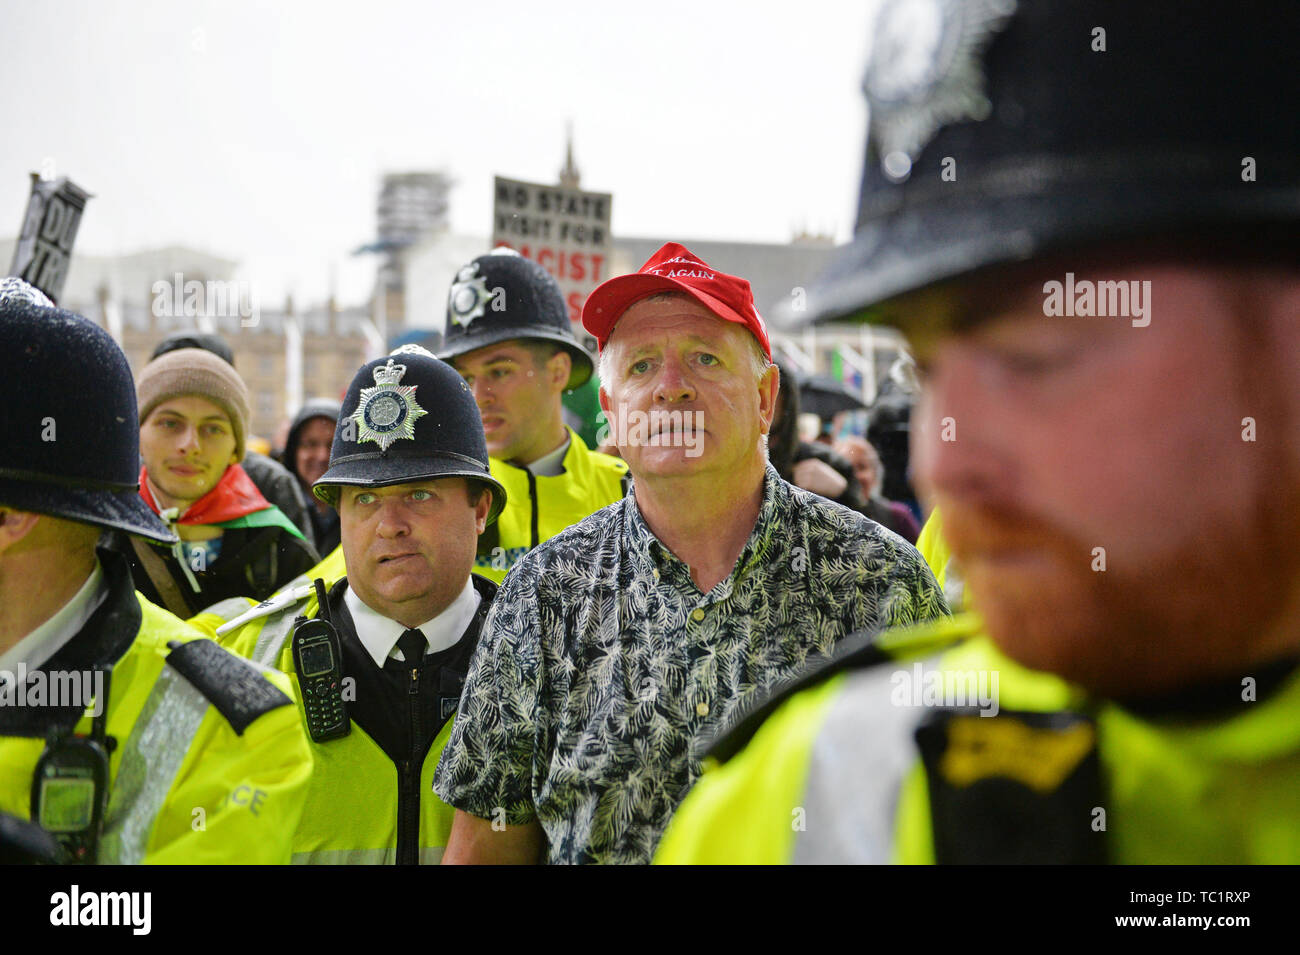 A Trump supporter is escorted by police after being covered in milkshake at Parliament Square, London on the second day of the state visit to the UK by US President Donald Trump. Stock Photo